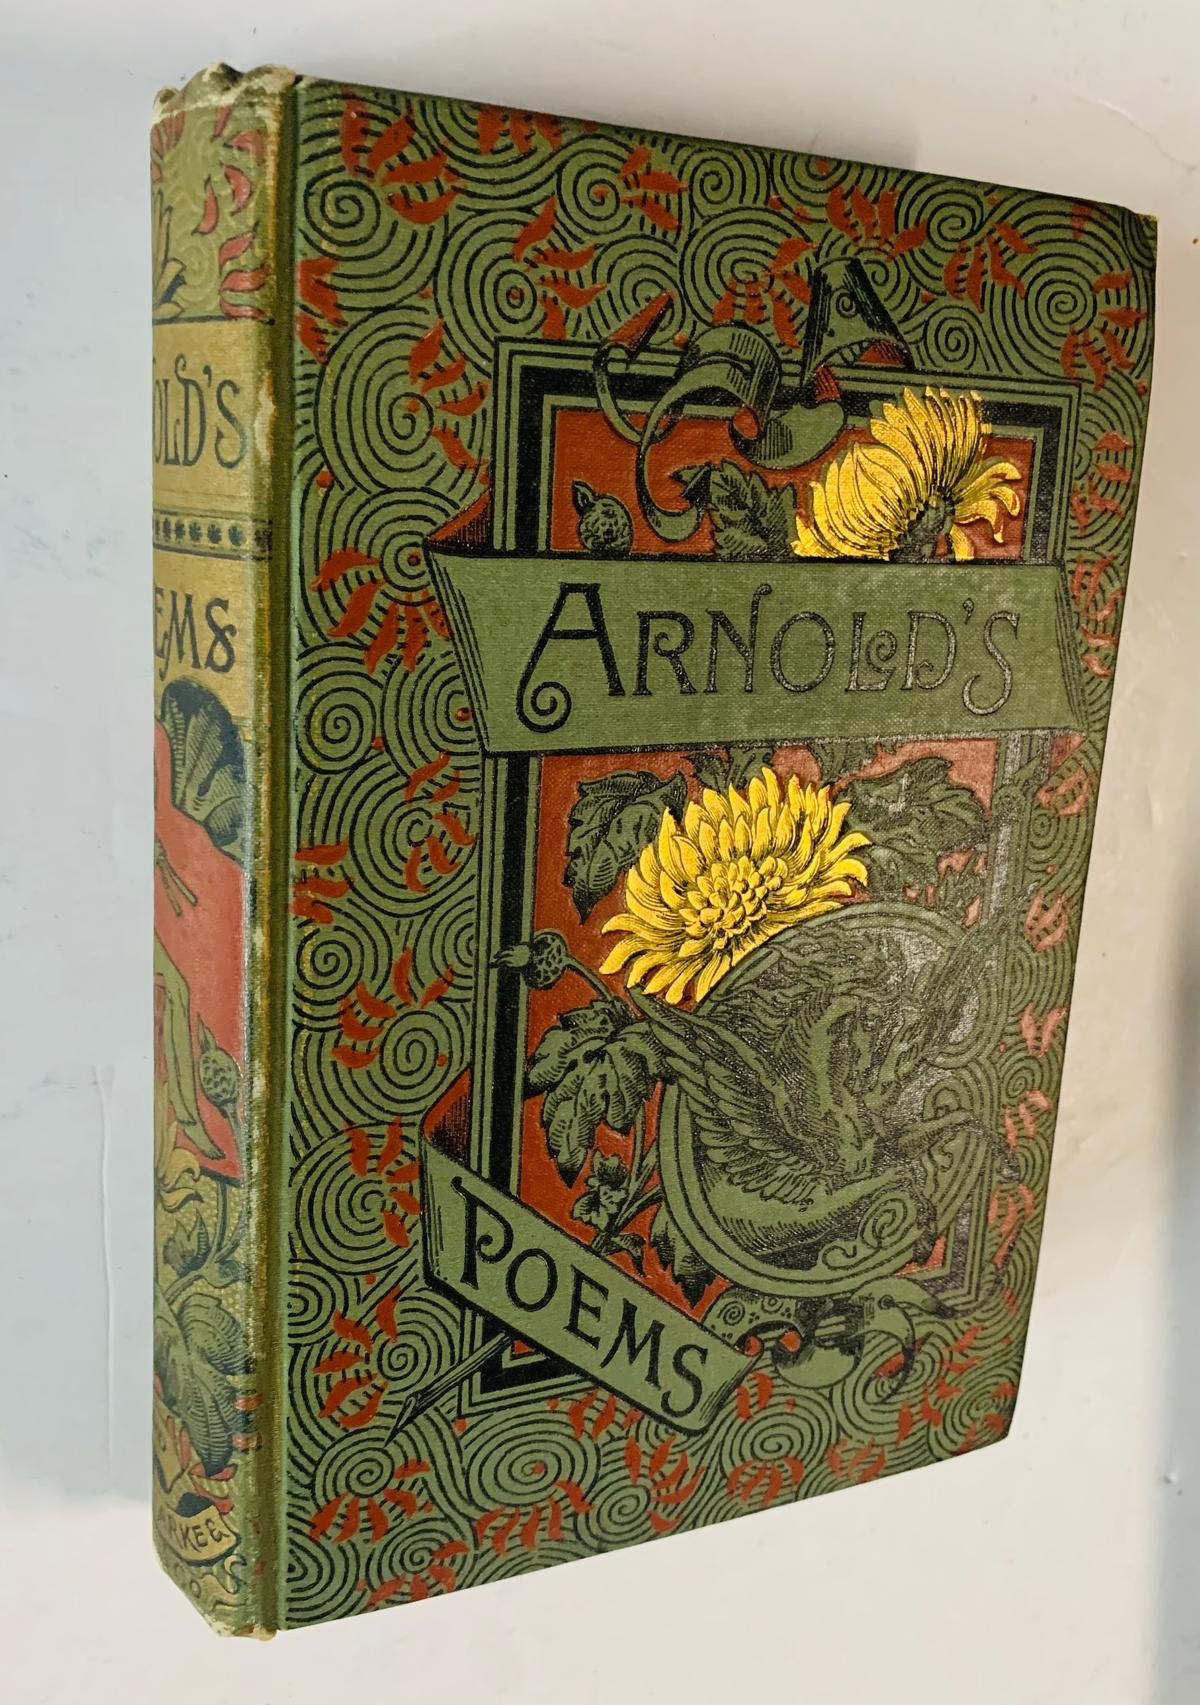 ARNOLD'S POEMS Including the LIGHT OF ASIA Teachings of Guatama Buddhist (c.1886) Decorative Cover